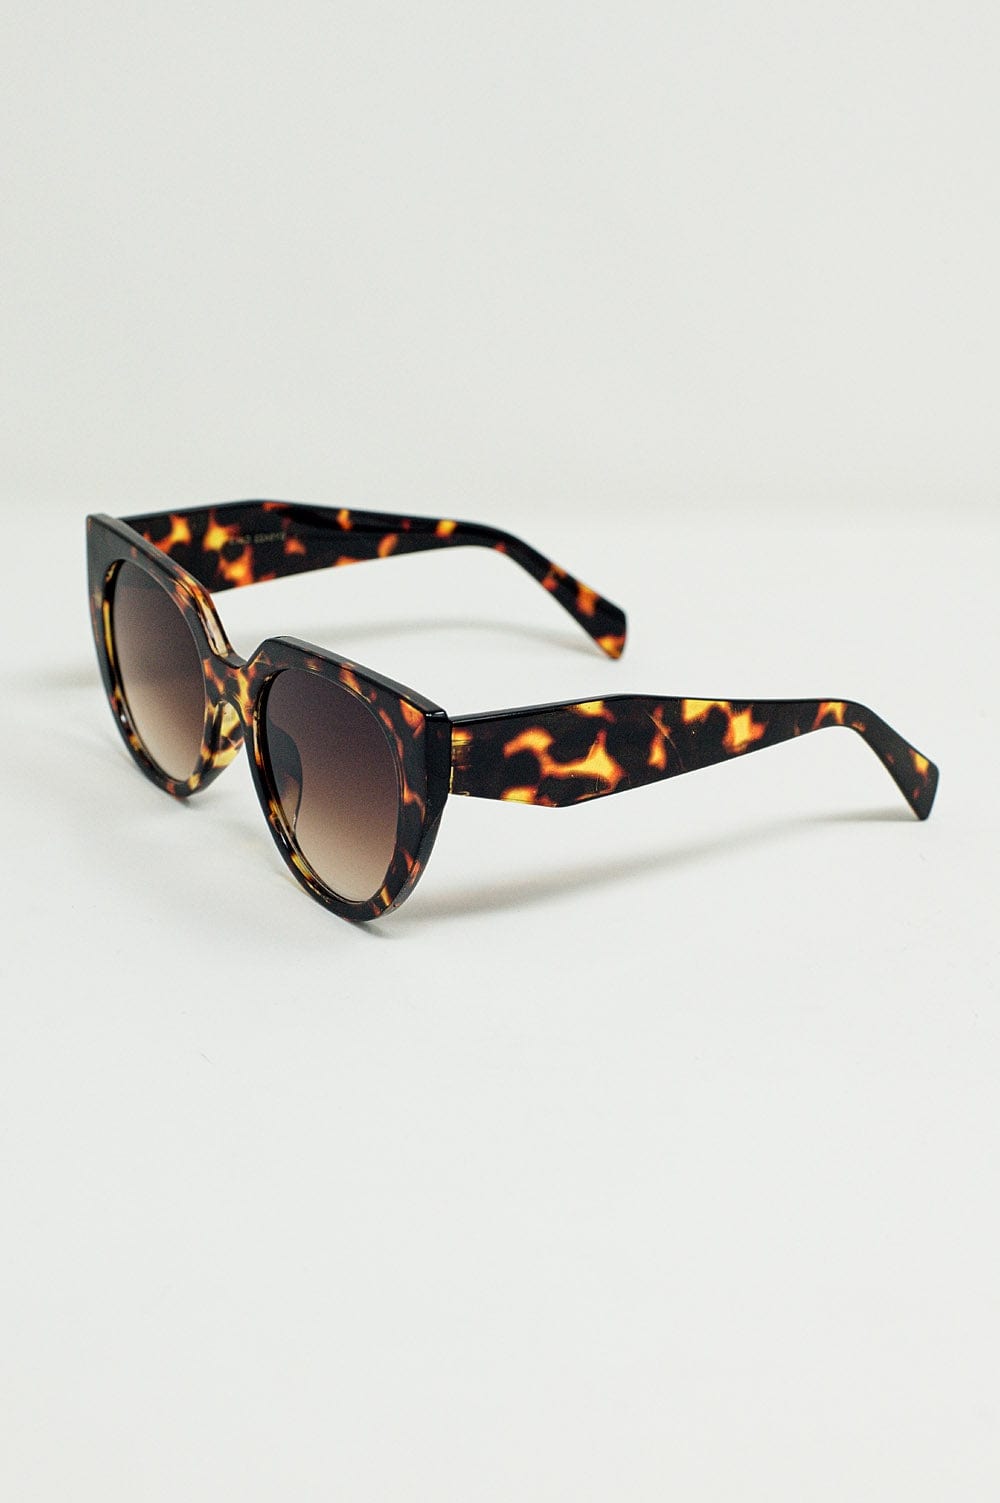 Q2 Women's Sunglasses One Size / Brown Oversized Cat Eye Sunglasses With Wide Rim In Tortoise Shell